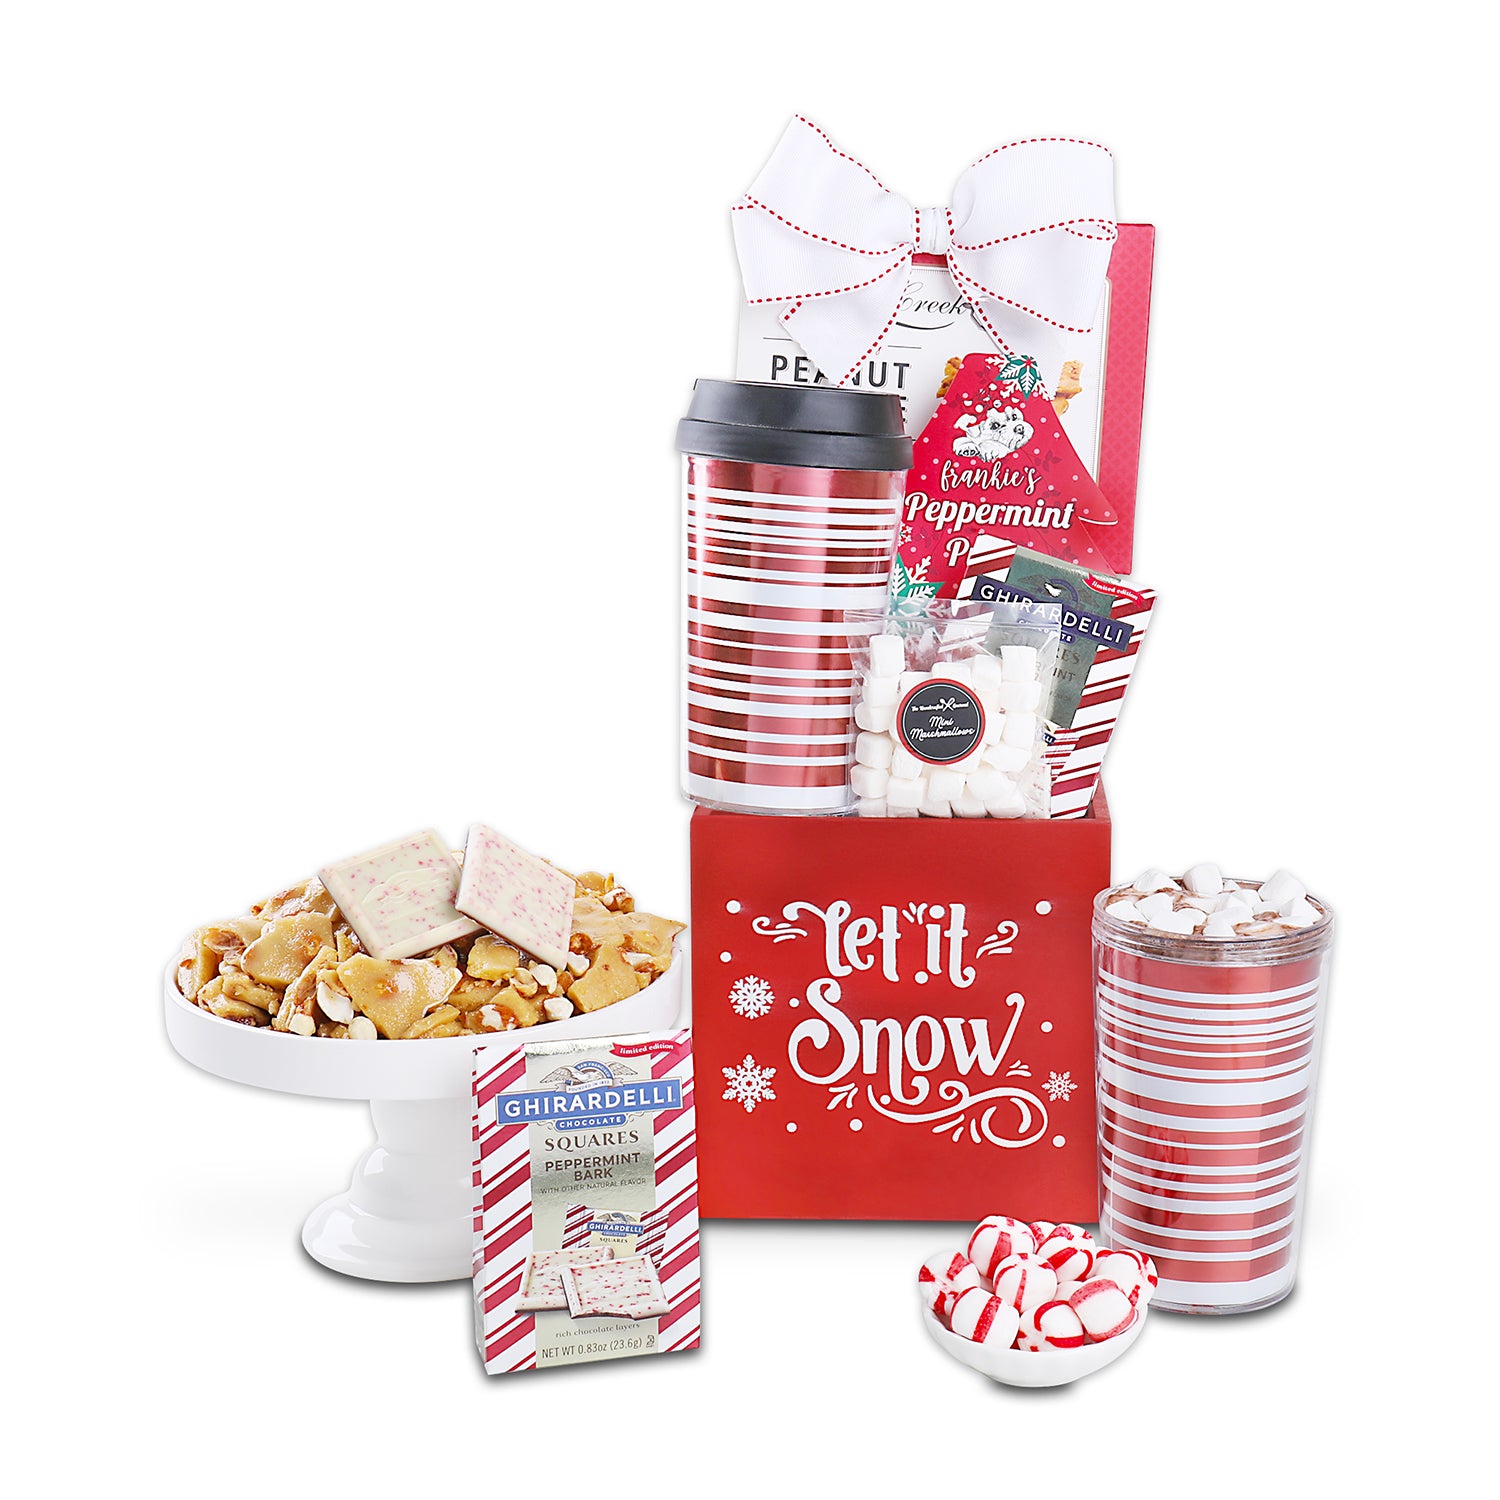 Old Fashioned Peanut Brittle (4oz.), Frankie’s Peppermint Puffs (0.9oz.), Marshmallows (1oz.), Ghirardelli Peppermint Bark Squares (0.83oz.), Red & White Travel Mug, Reusable Wood Crate